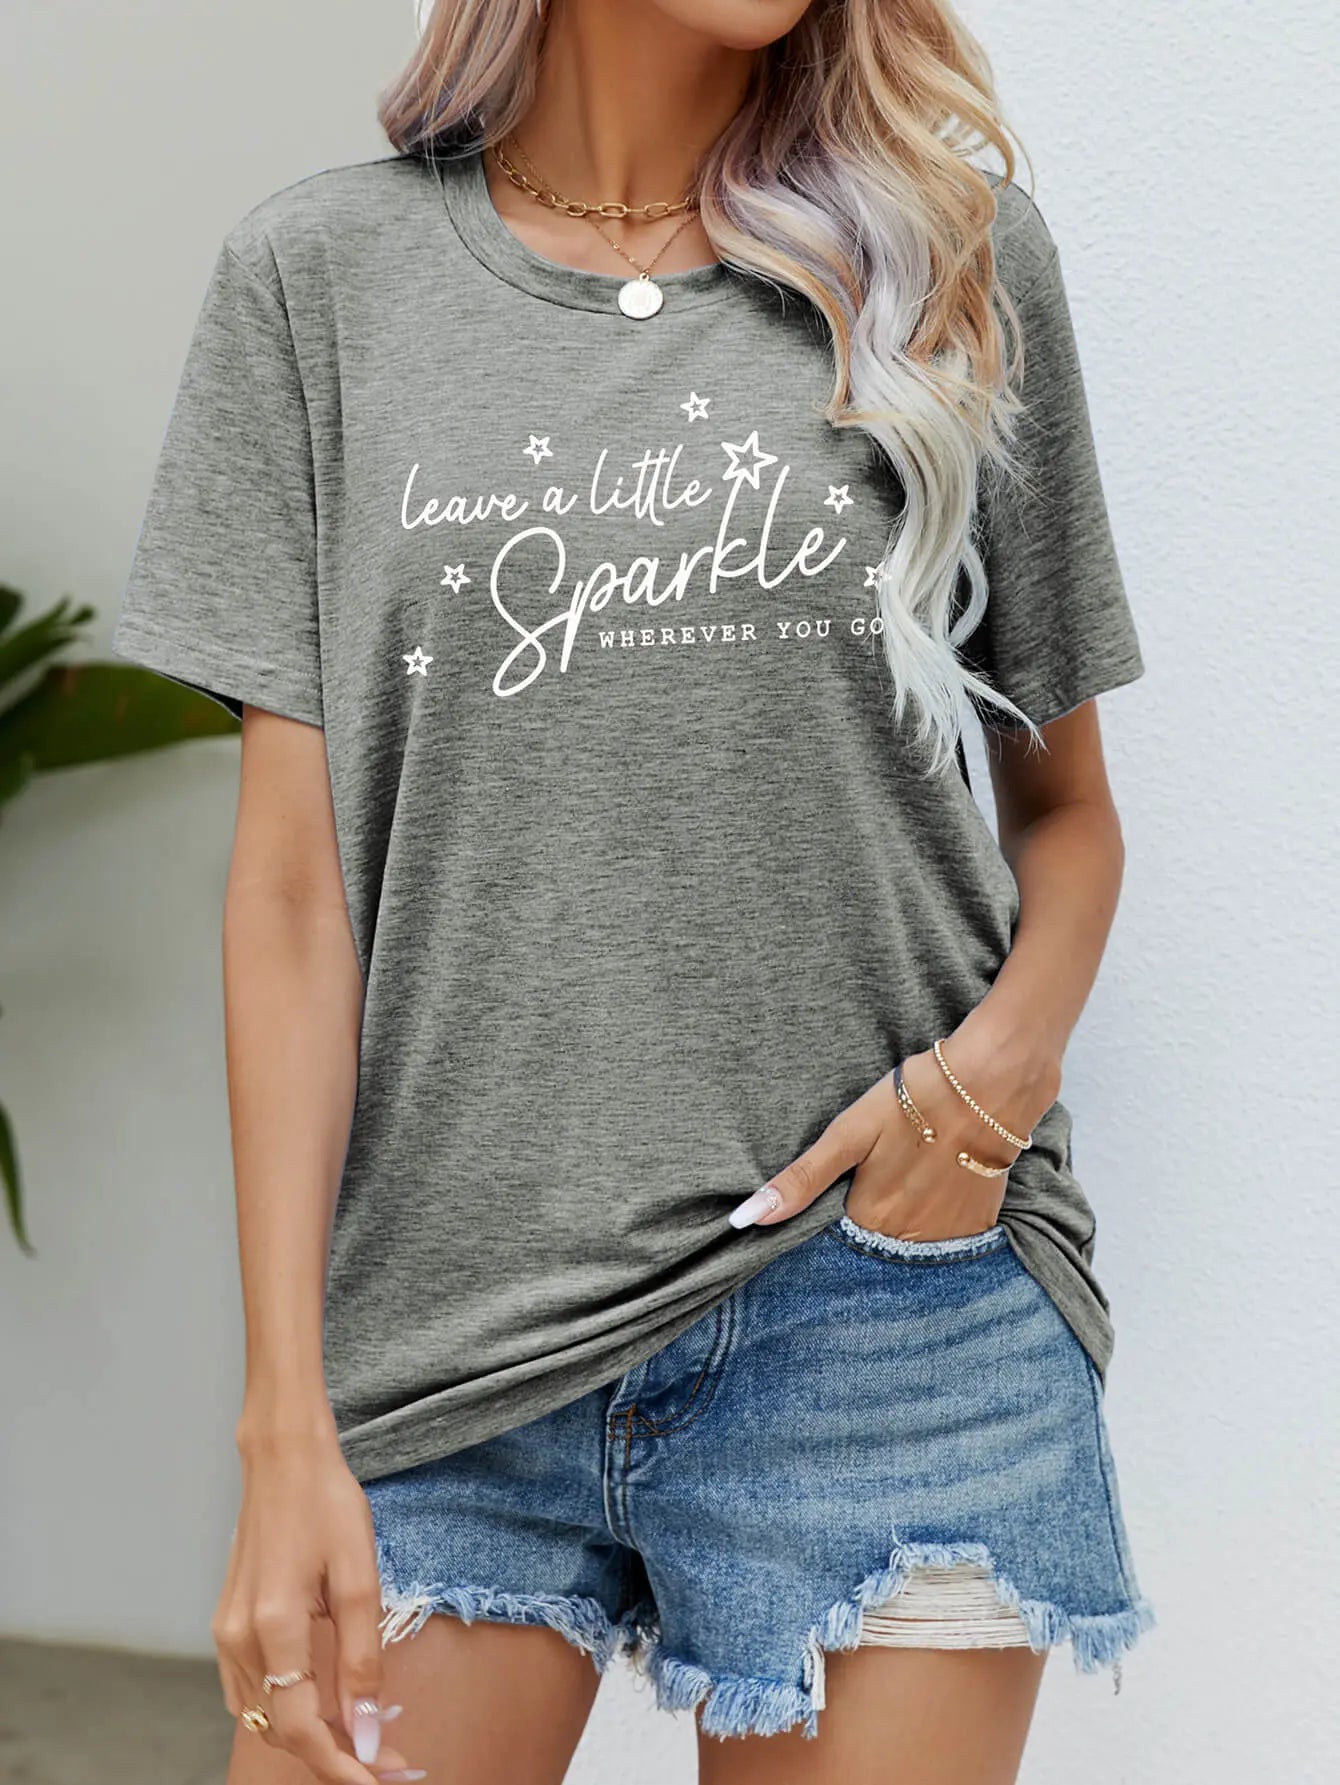 LEAVE A LITTLE SPARKLE WHEREVER YOU GO Tee Shirt - Image #1